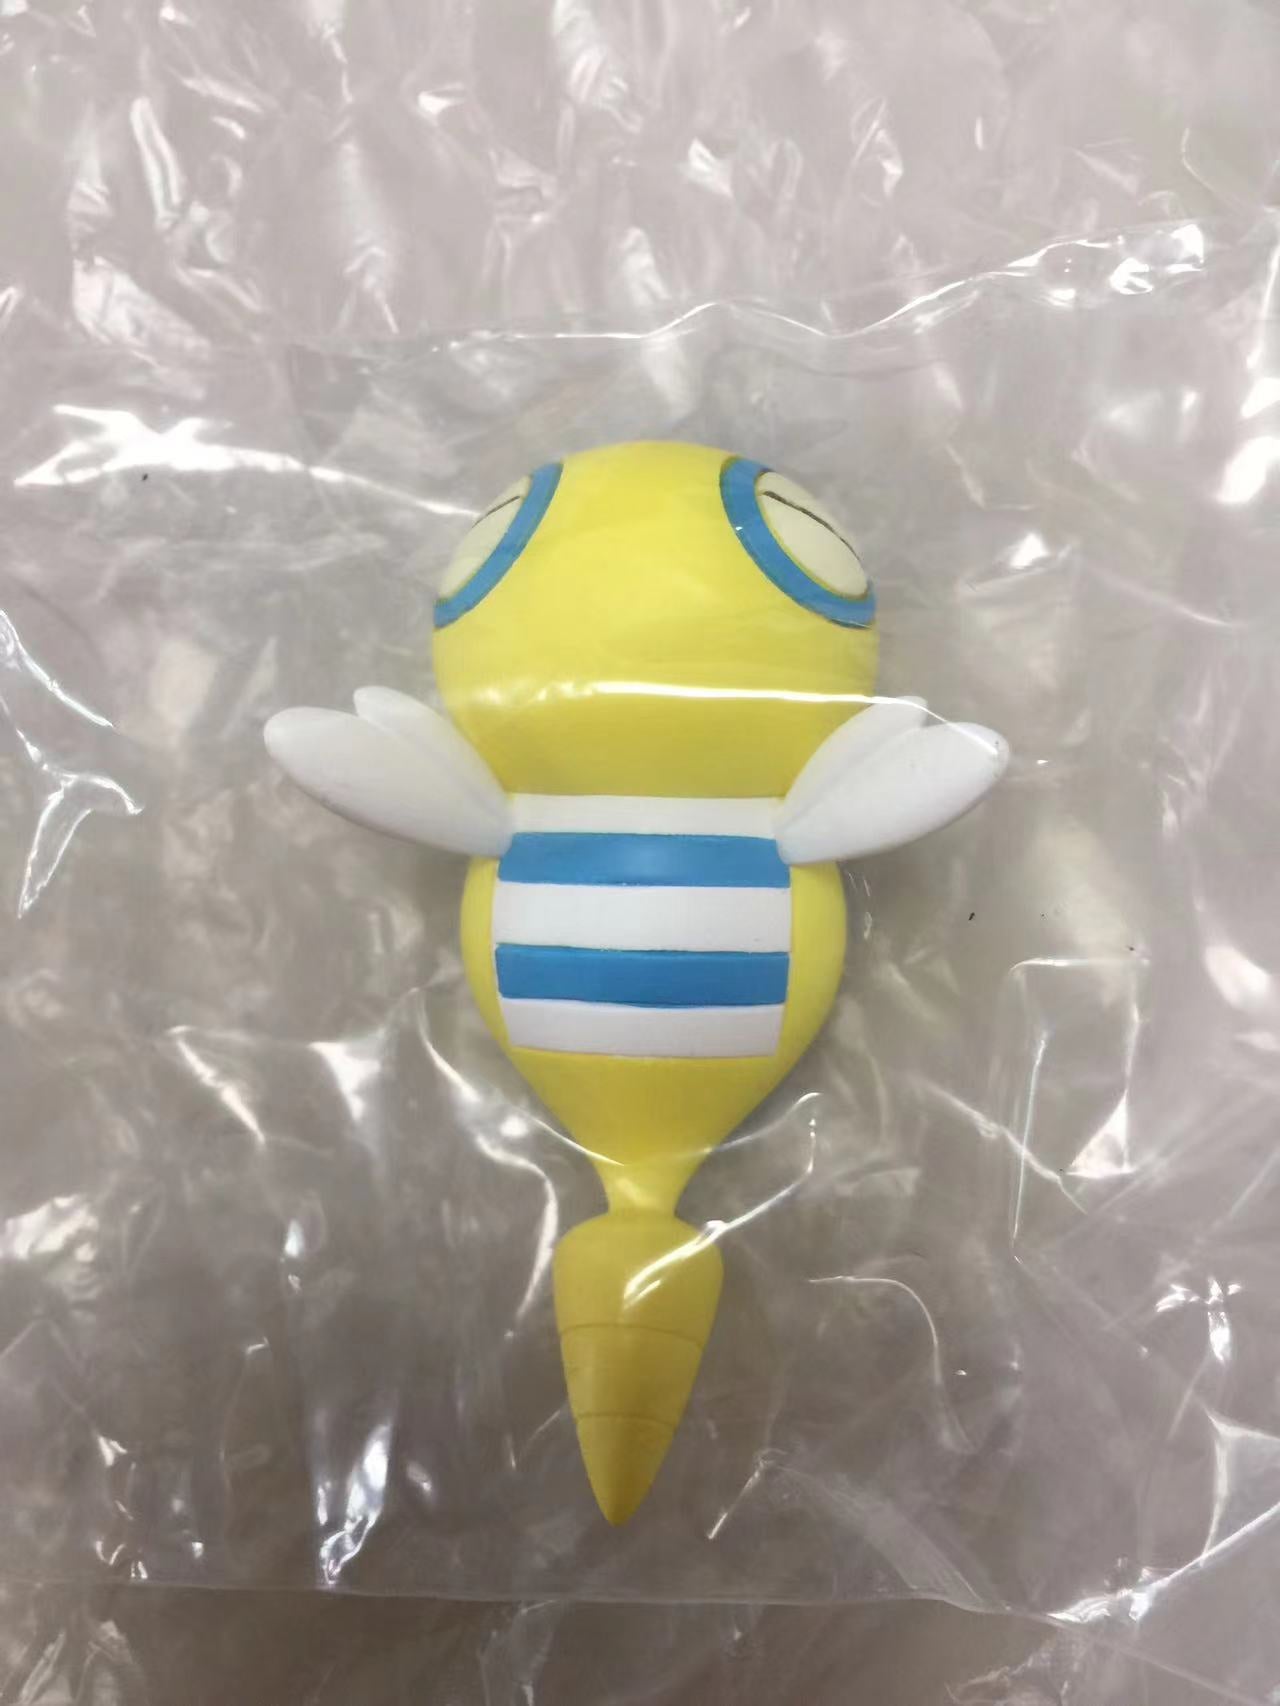 〖Sold Out〗Pokemon Scale World Dunsparce #206 1:20 - OS Studio